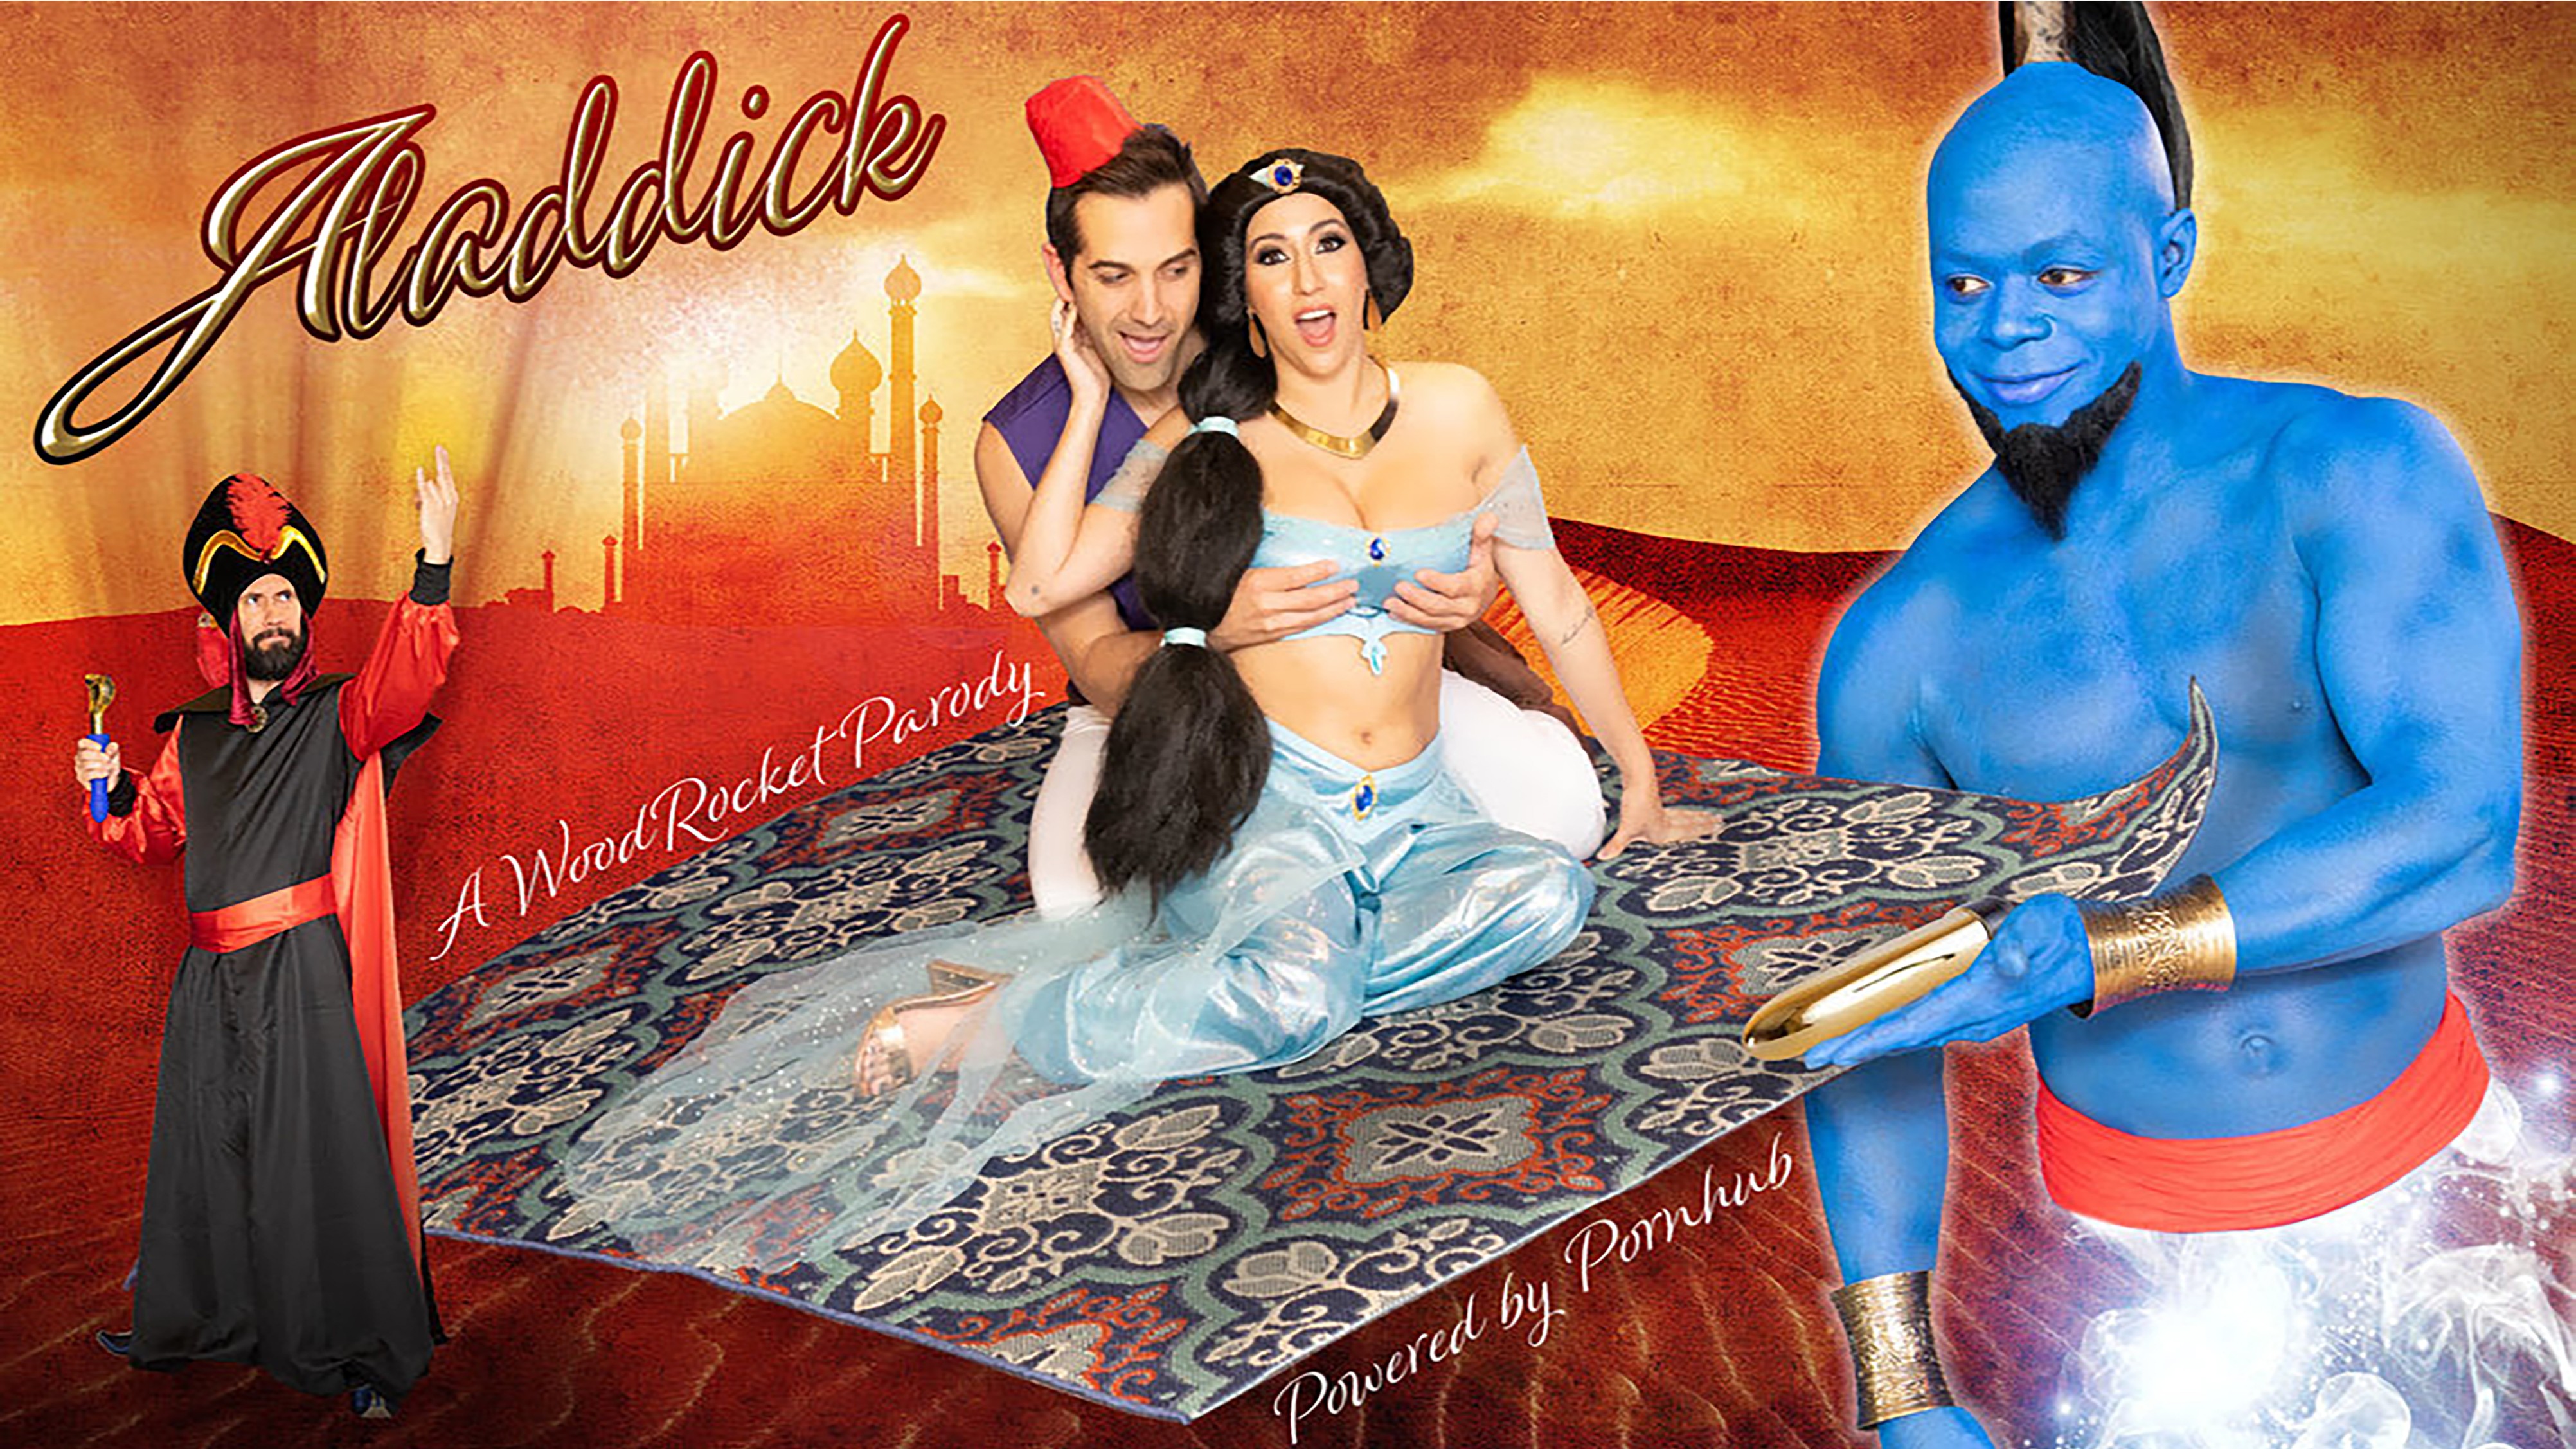 Aladdin Sex Videos - The 'Aladdin' Porn Parody Is Here and We Fixed Its Title